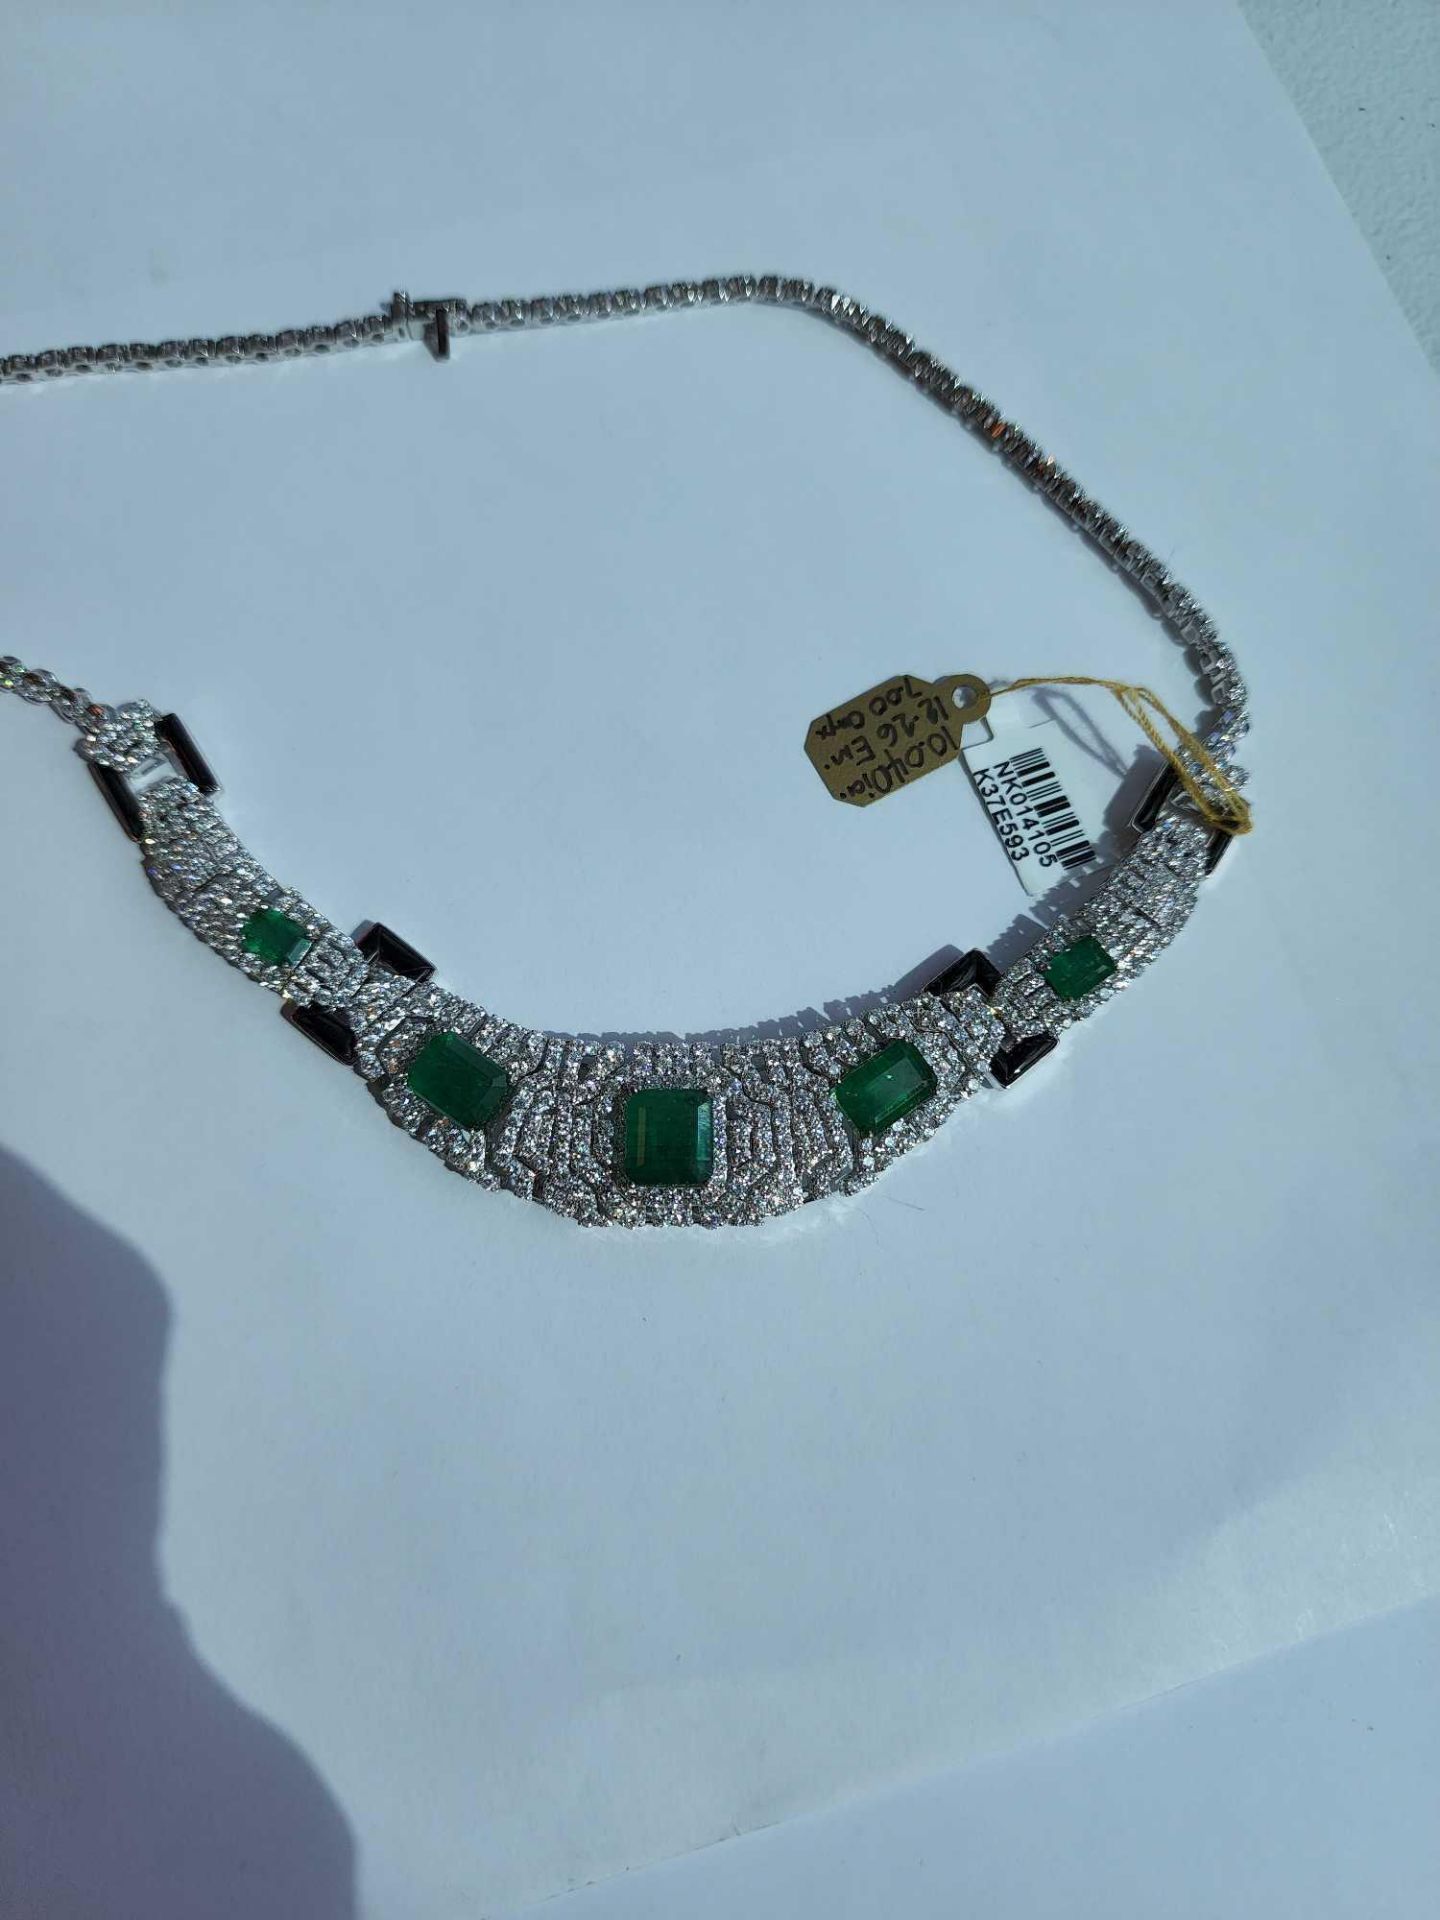 18K White Gold Emerald & Diamond Necklace Weight: 43.88 grams Emeralds 12.26 cts/ Diamonds 10.04 cts